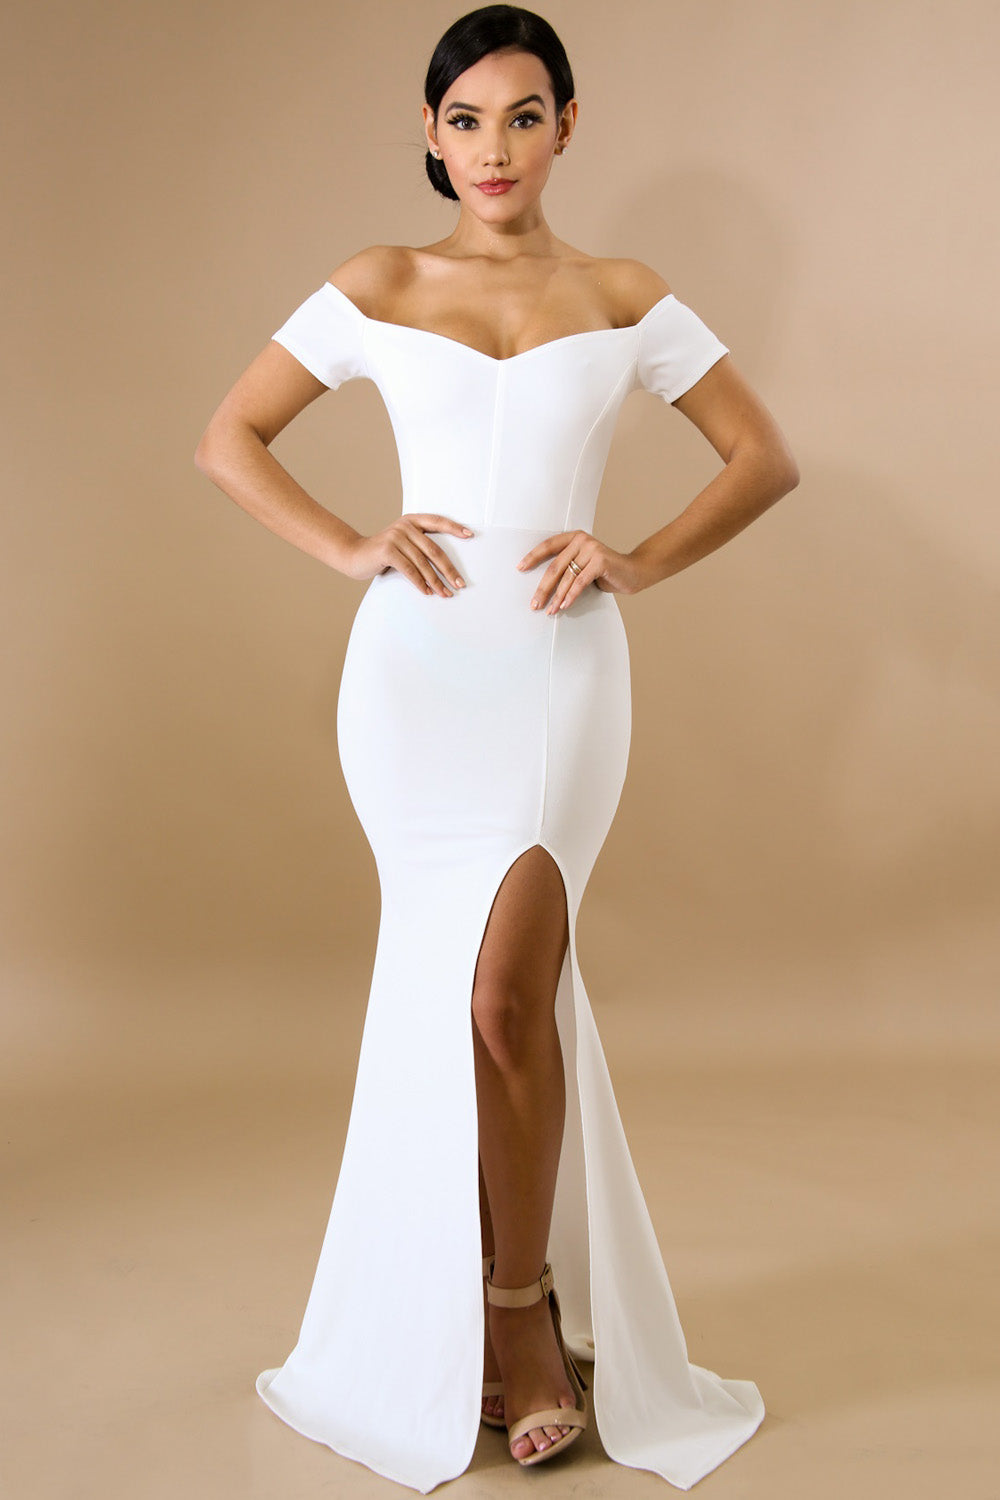 goPals full length white off-the-shoulder dress with thigh high slit. 